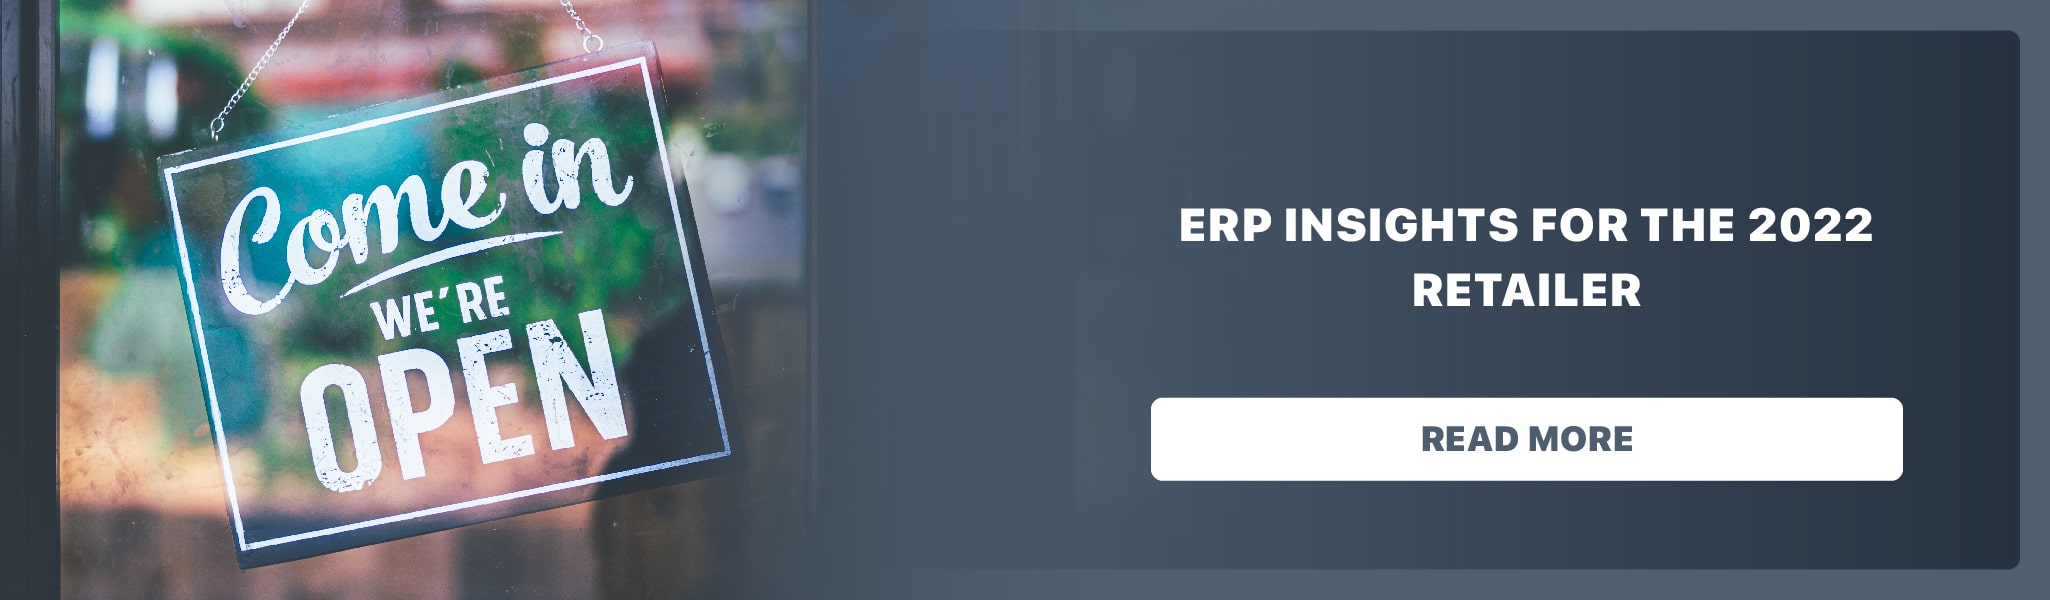 ERP Insights for the 2022 Retailer